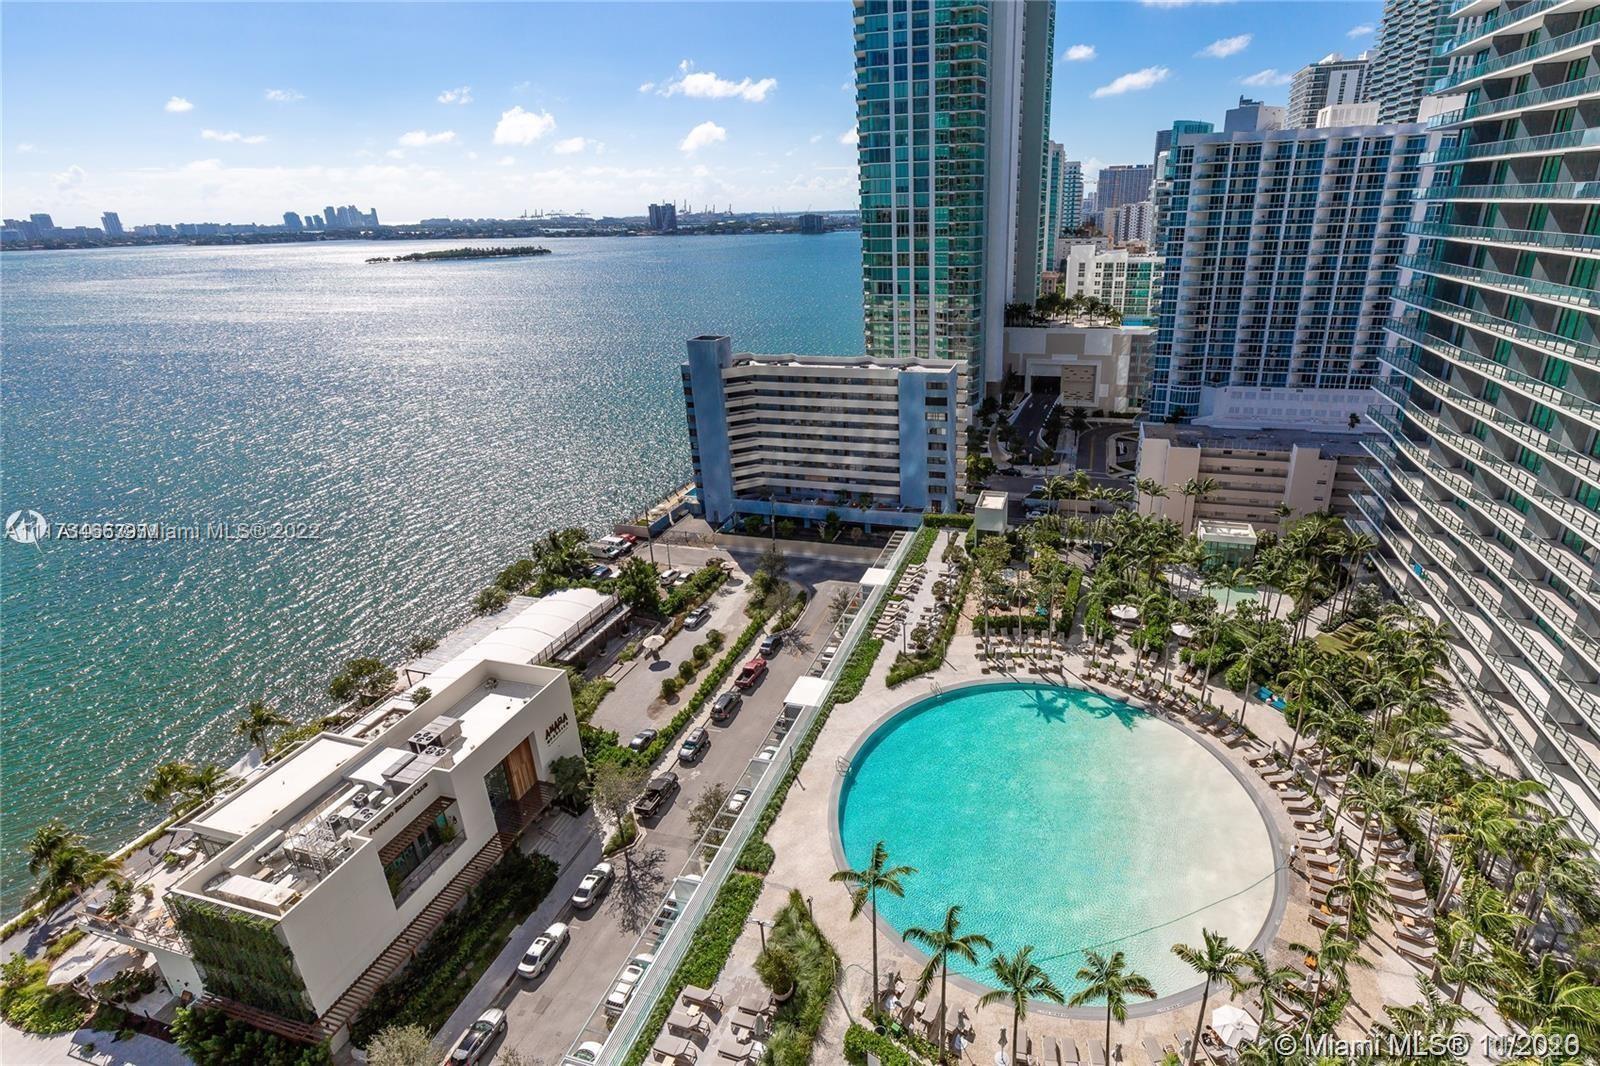 Amazing apartment 2/3 1301 sqf, with stunning views of miami skyline and ocean 360, located in the c